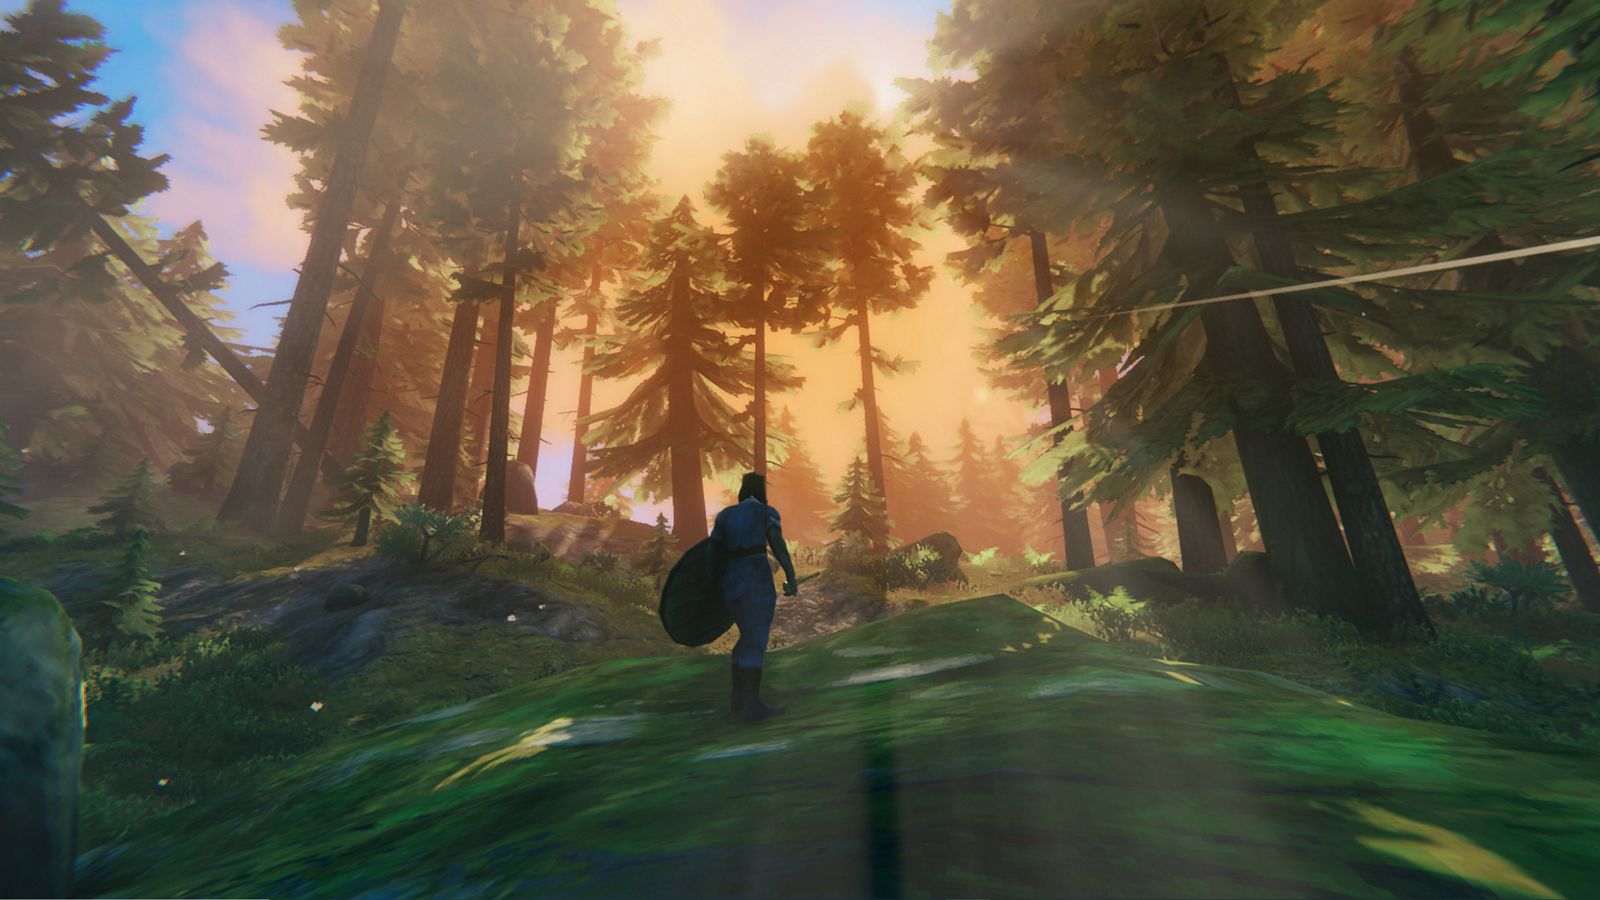 A player cresting a hill in the Forest area of Valheim. The sun shines through the trees above.